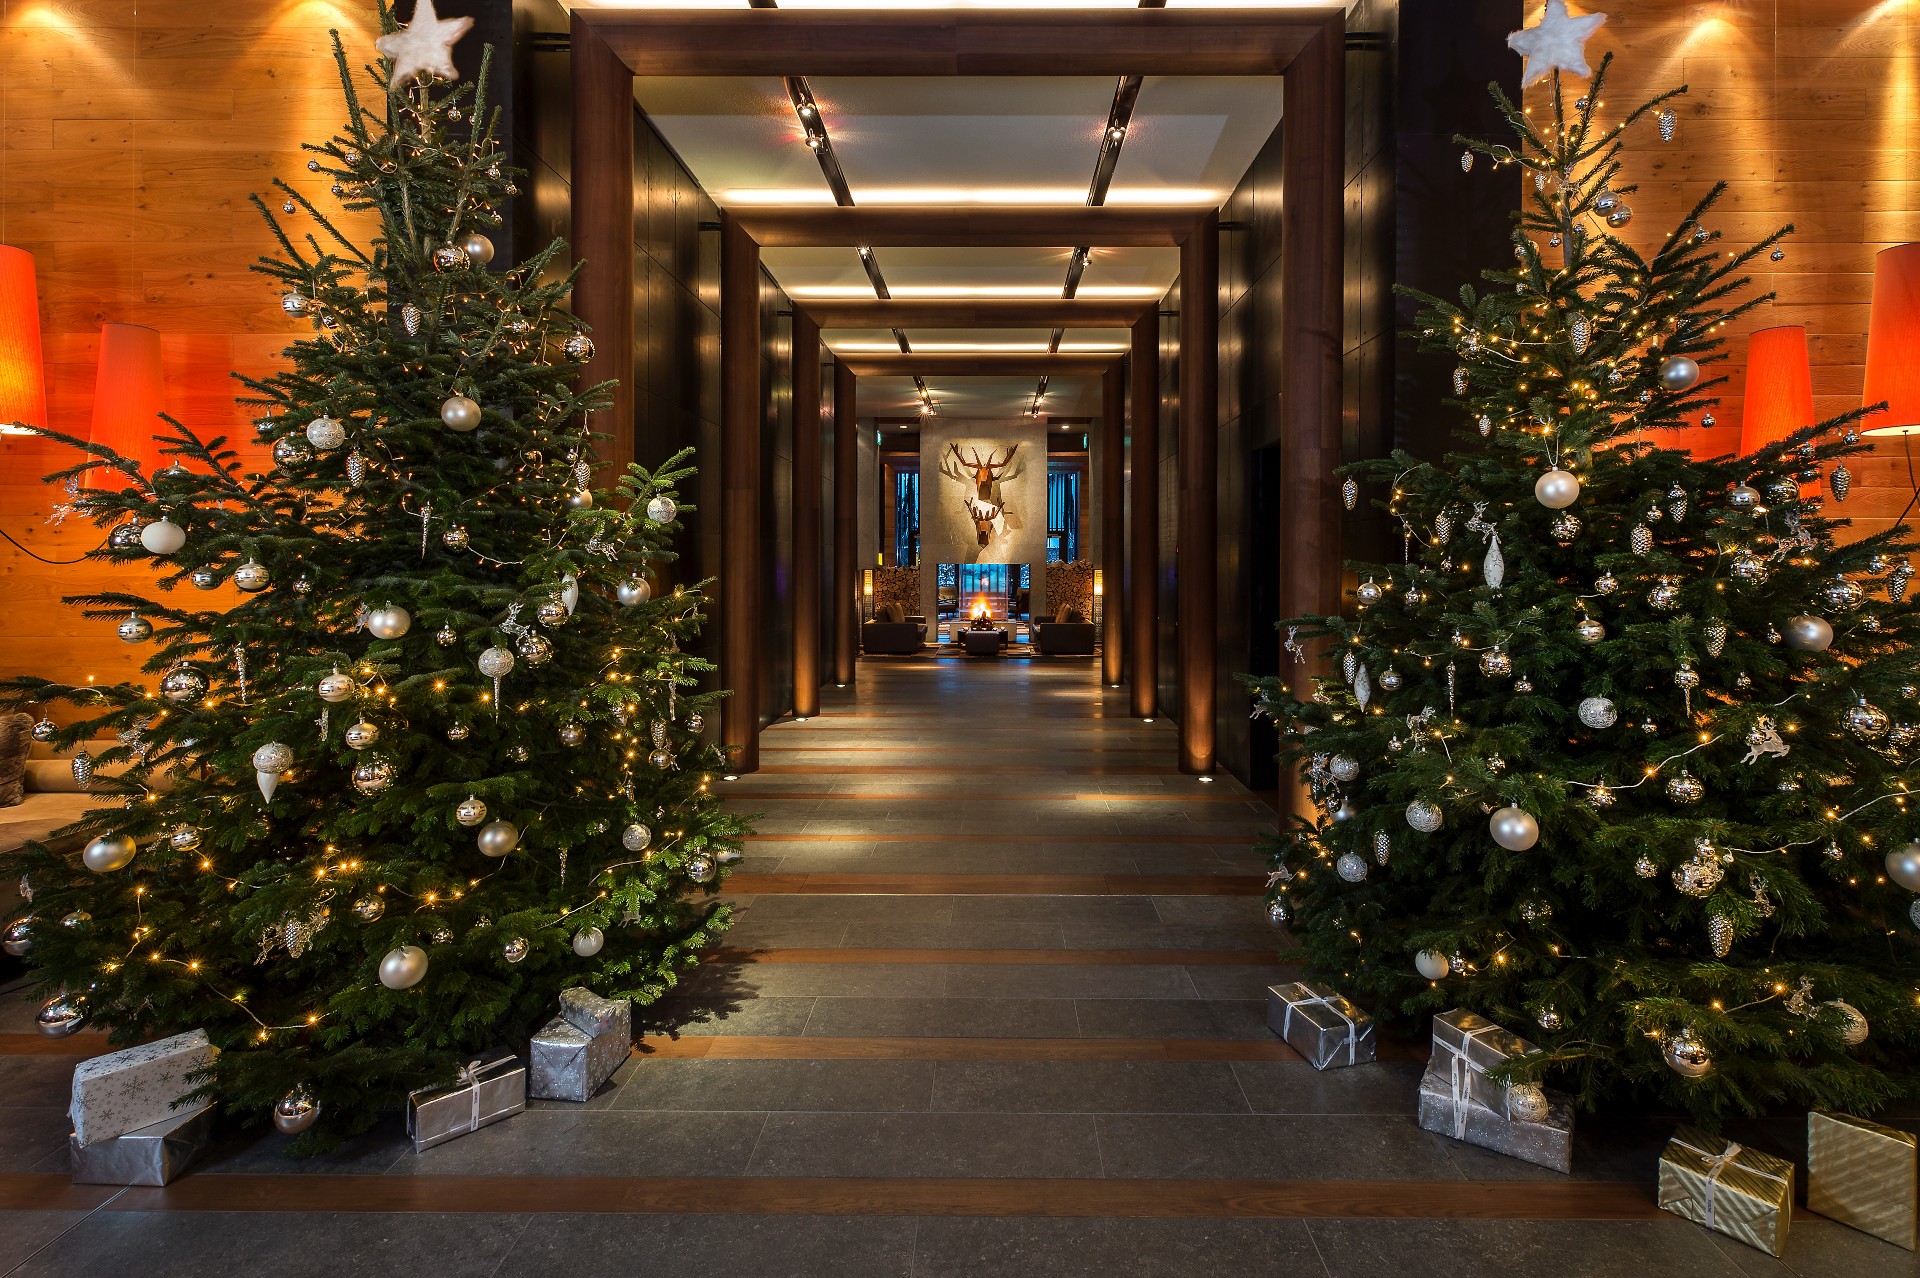 A Hallway With Christmas Trees